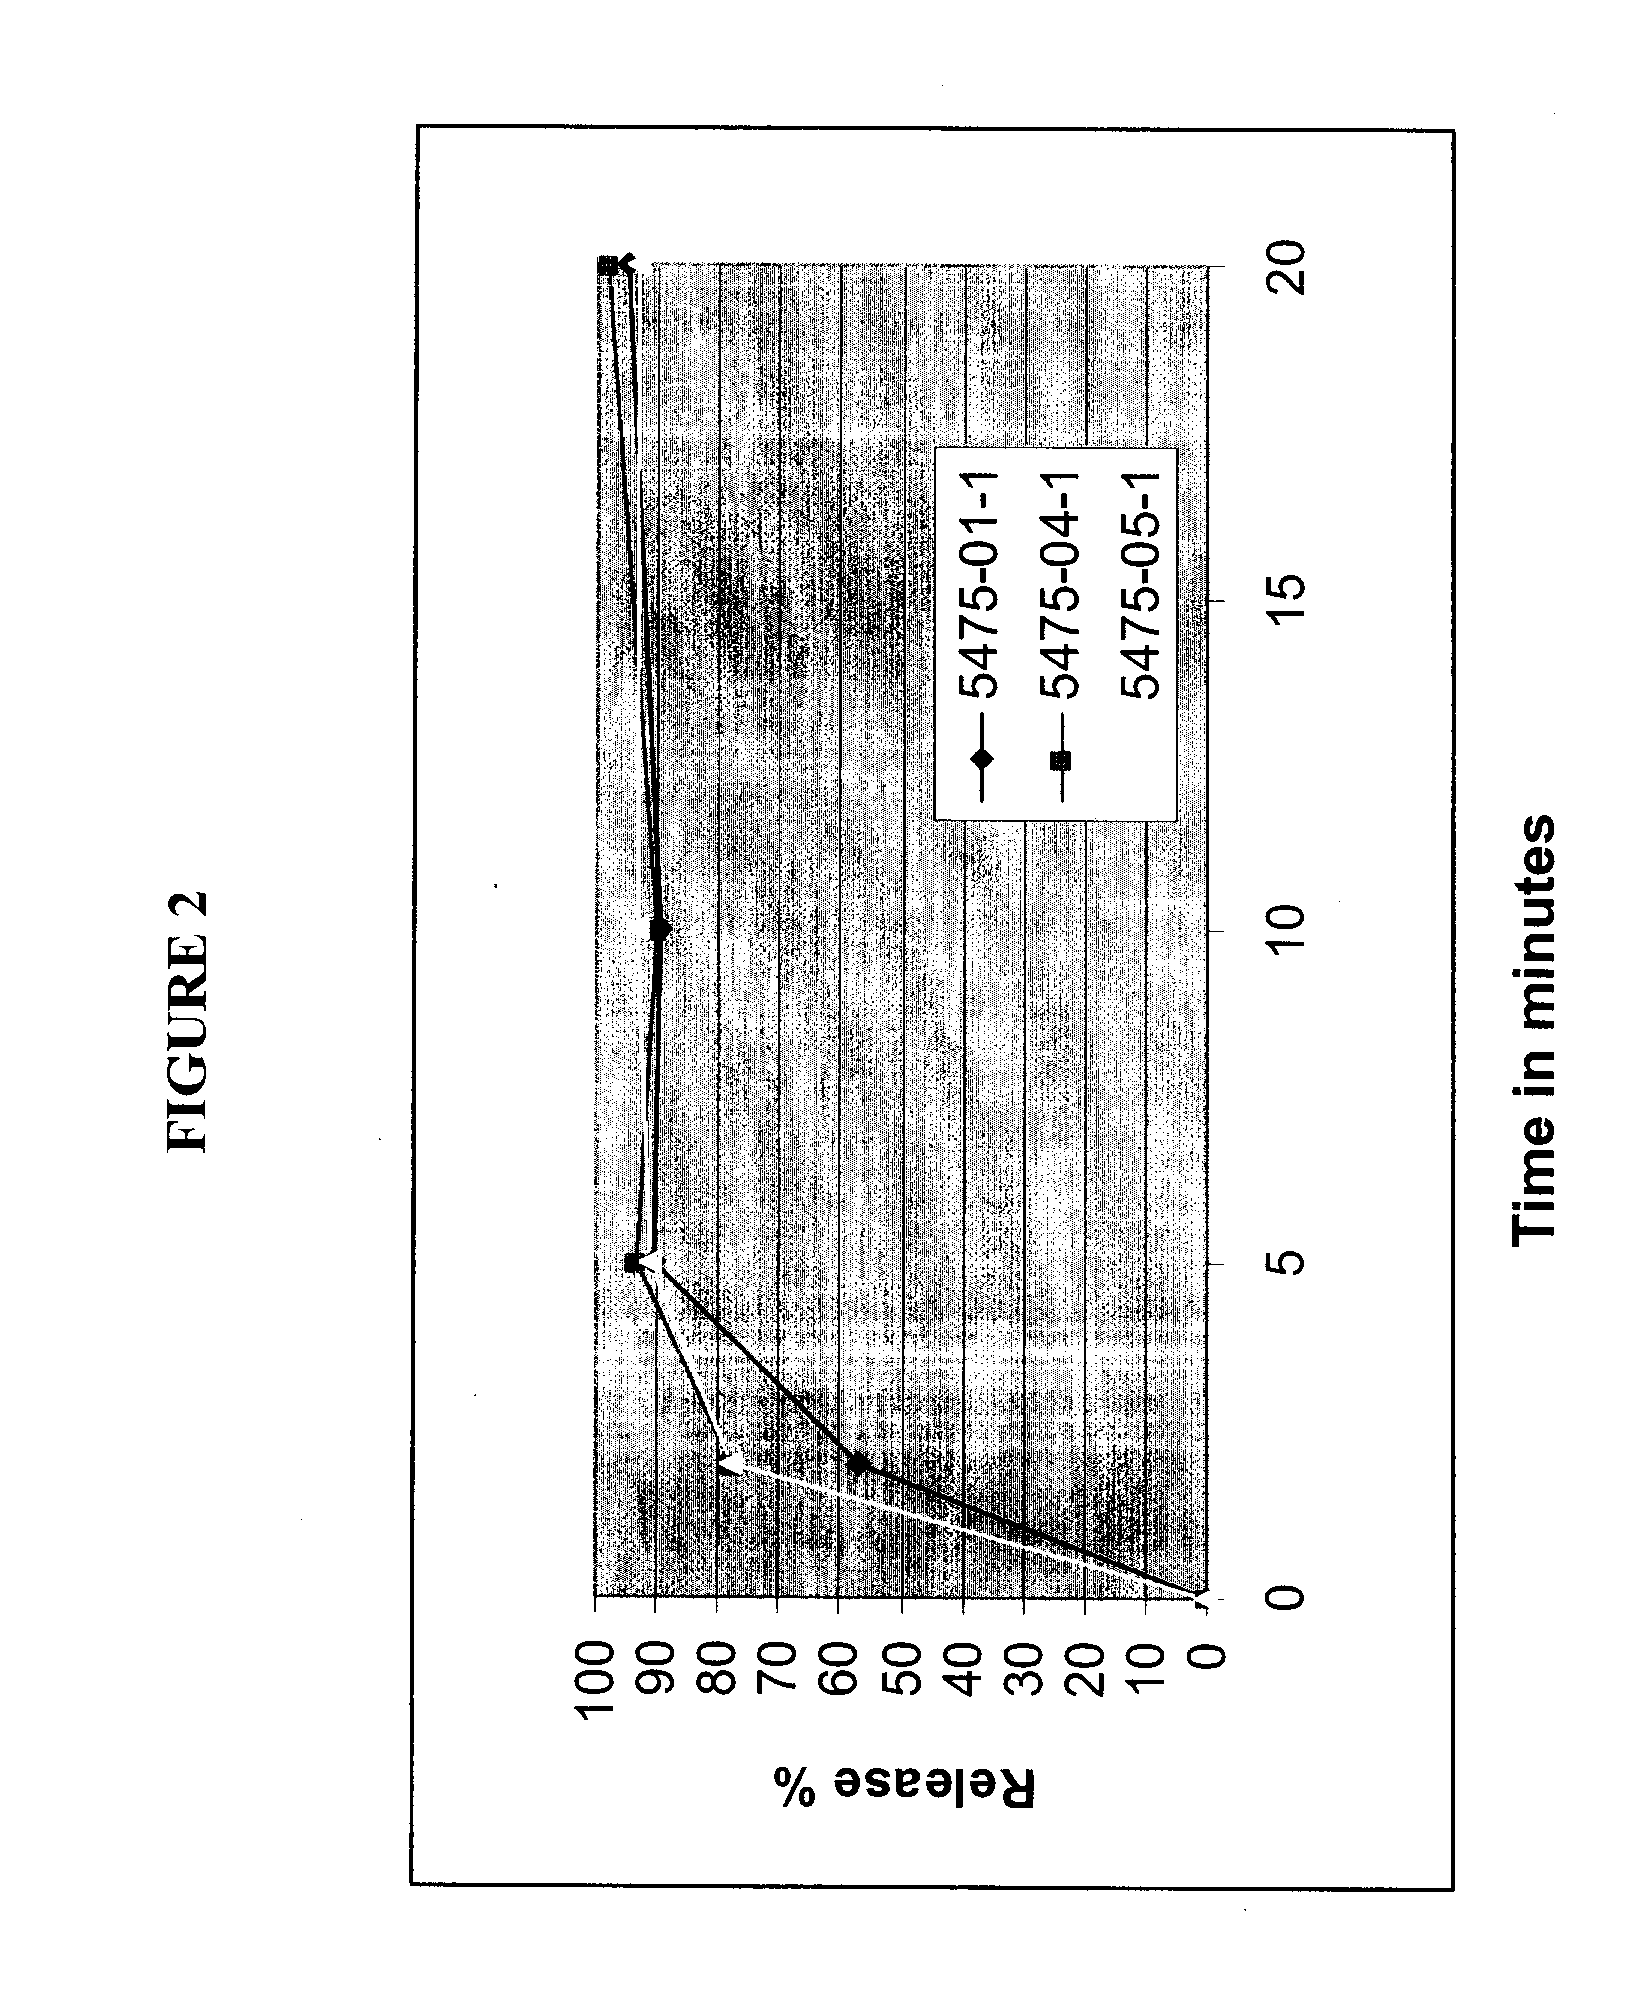 Compositions for Oral Transmucosal Delivery of Metformin